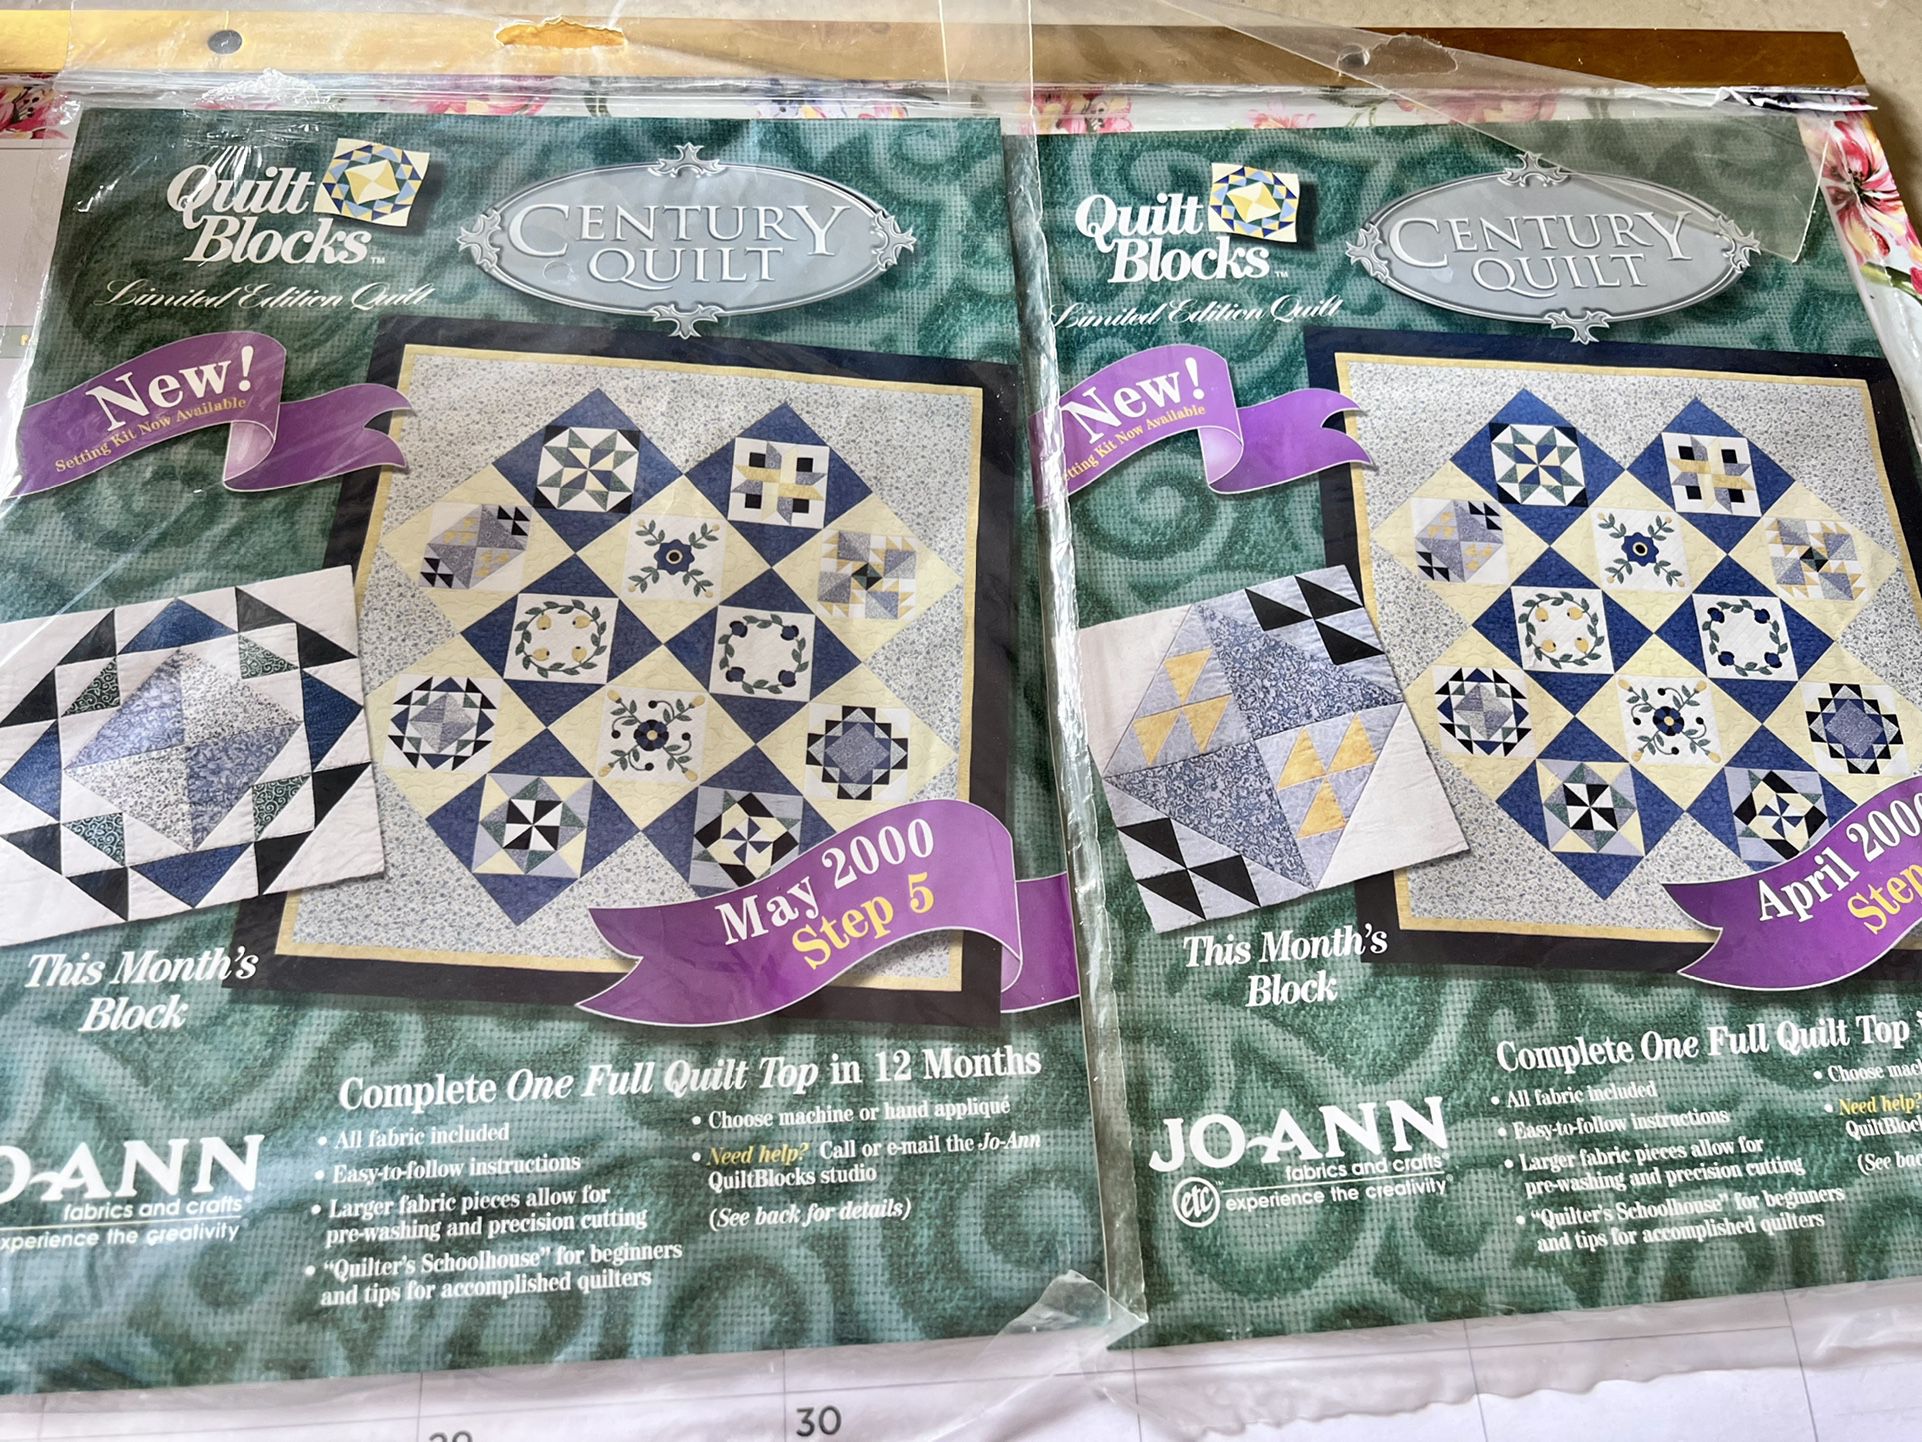 Vintage 2000 Lot Of JoAnn Fabrics And Crafts Experience The Creativity Century Quilt Blocks Months February To December 2000.